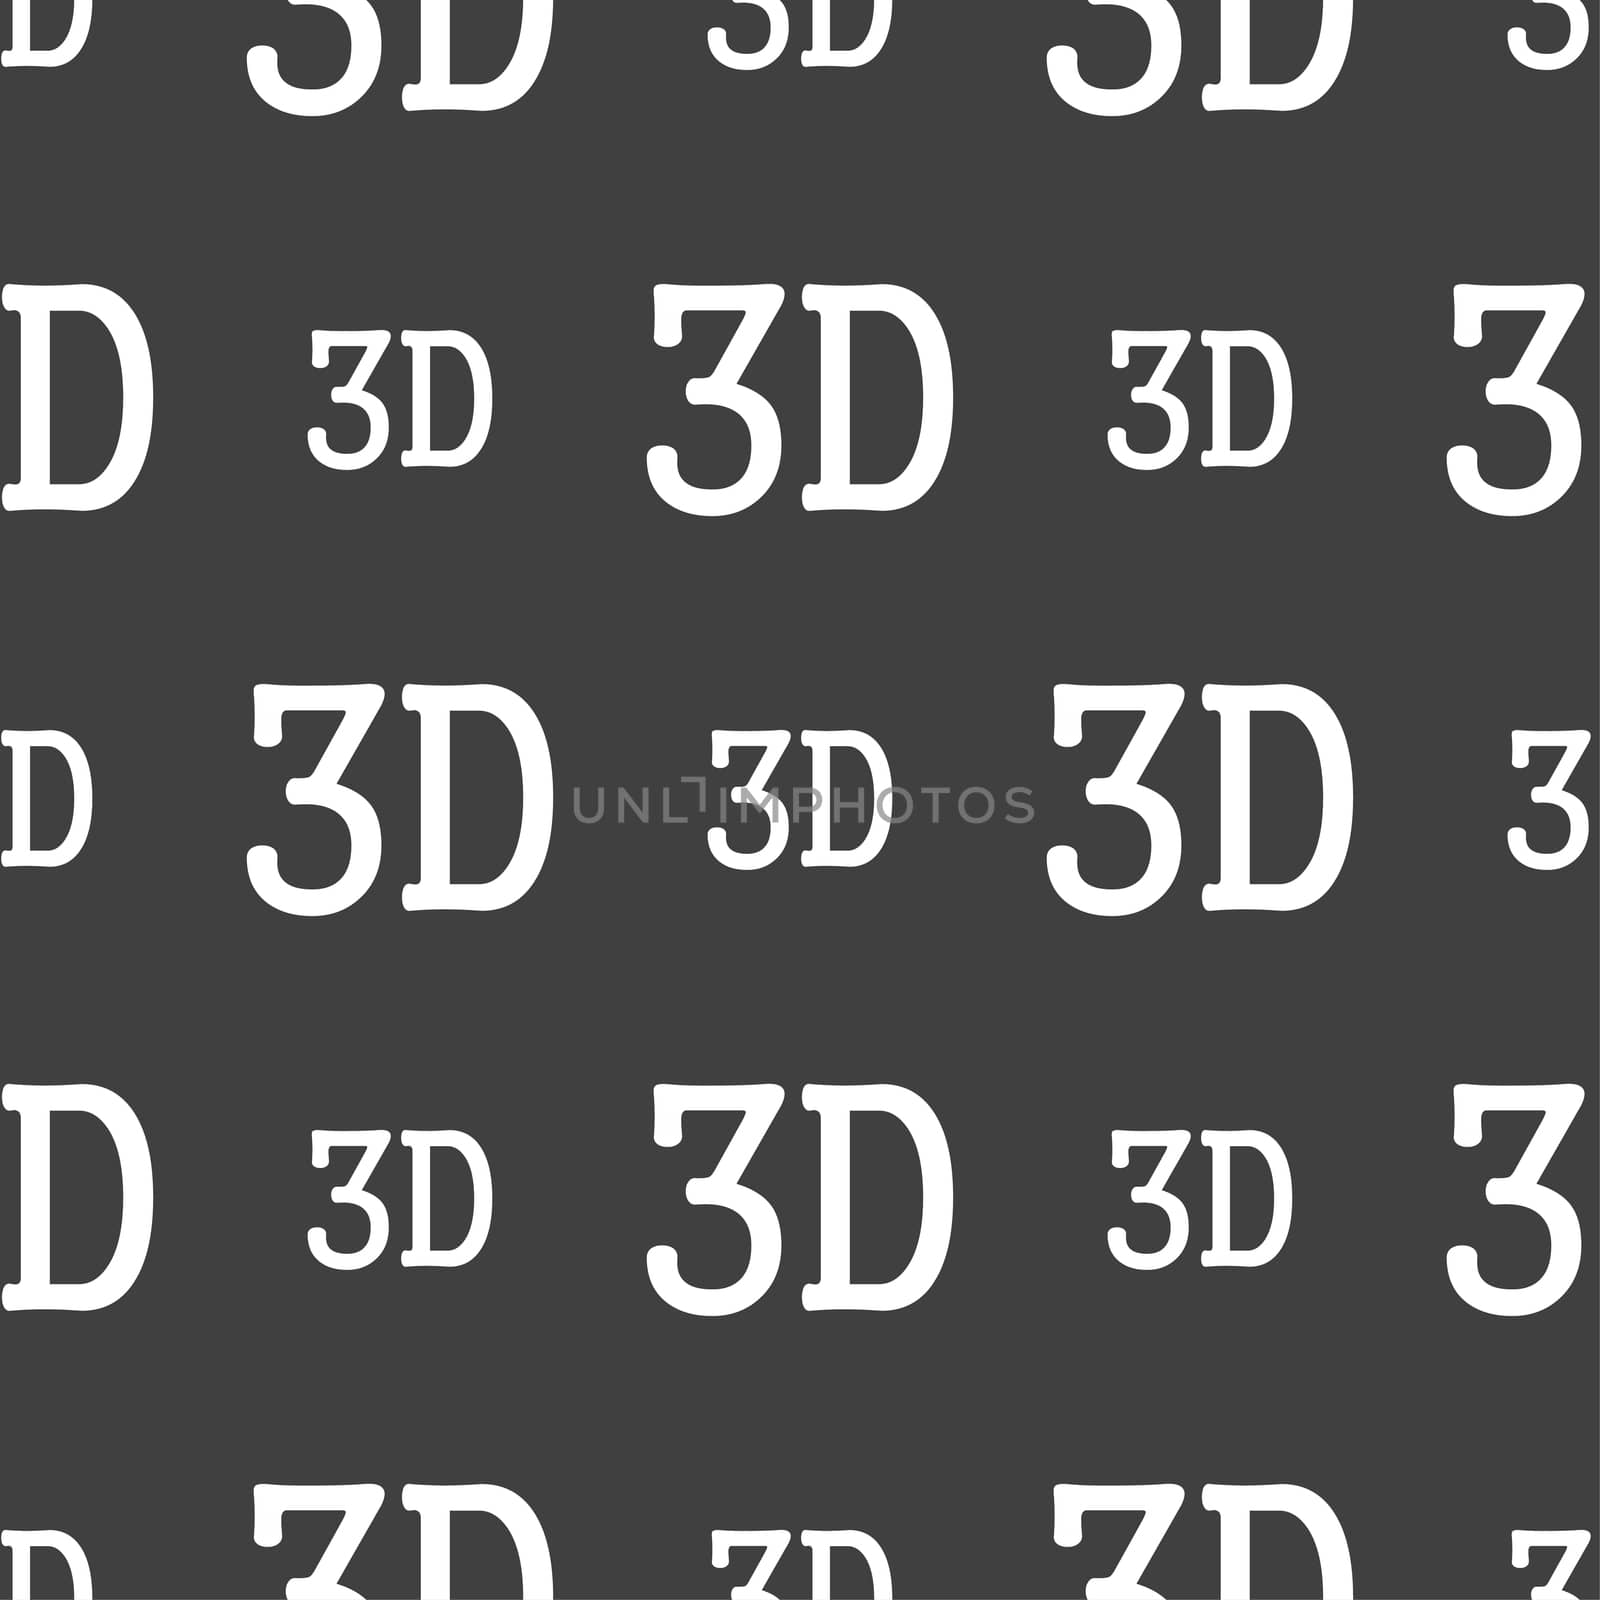 3D sign icon. 3D New technology symbol. Seamless pattern on a gray background. illustration